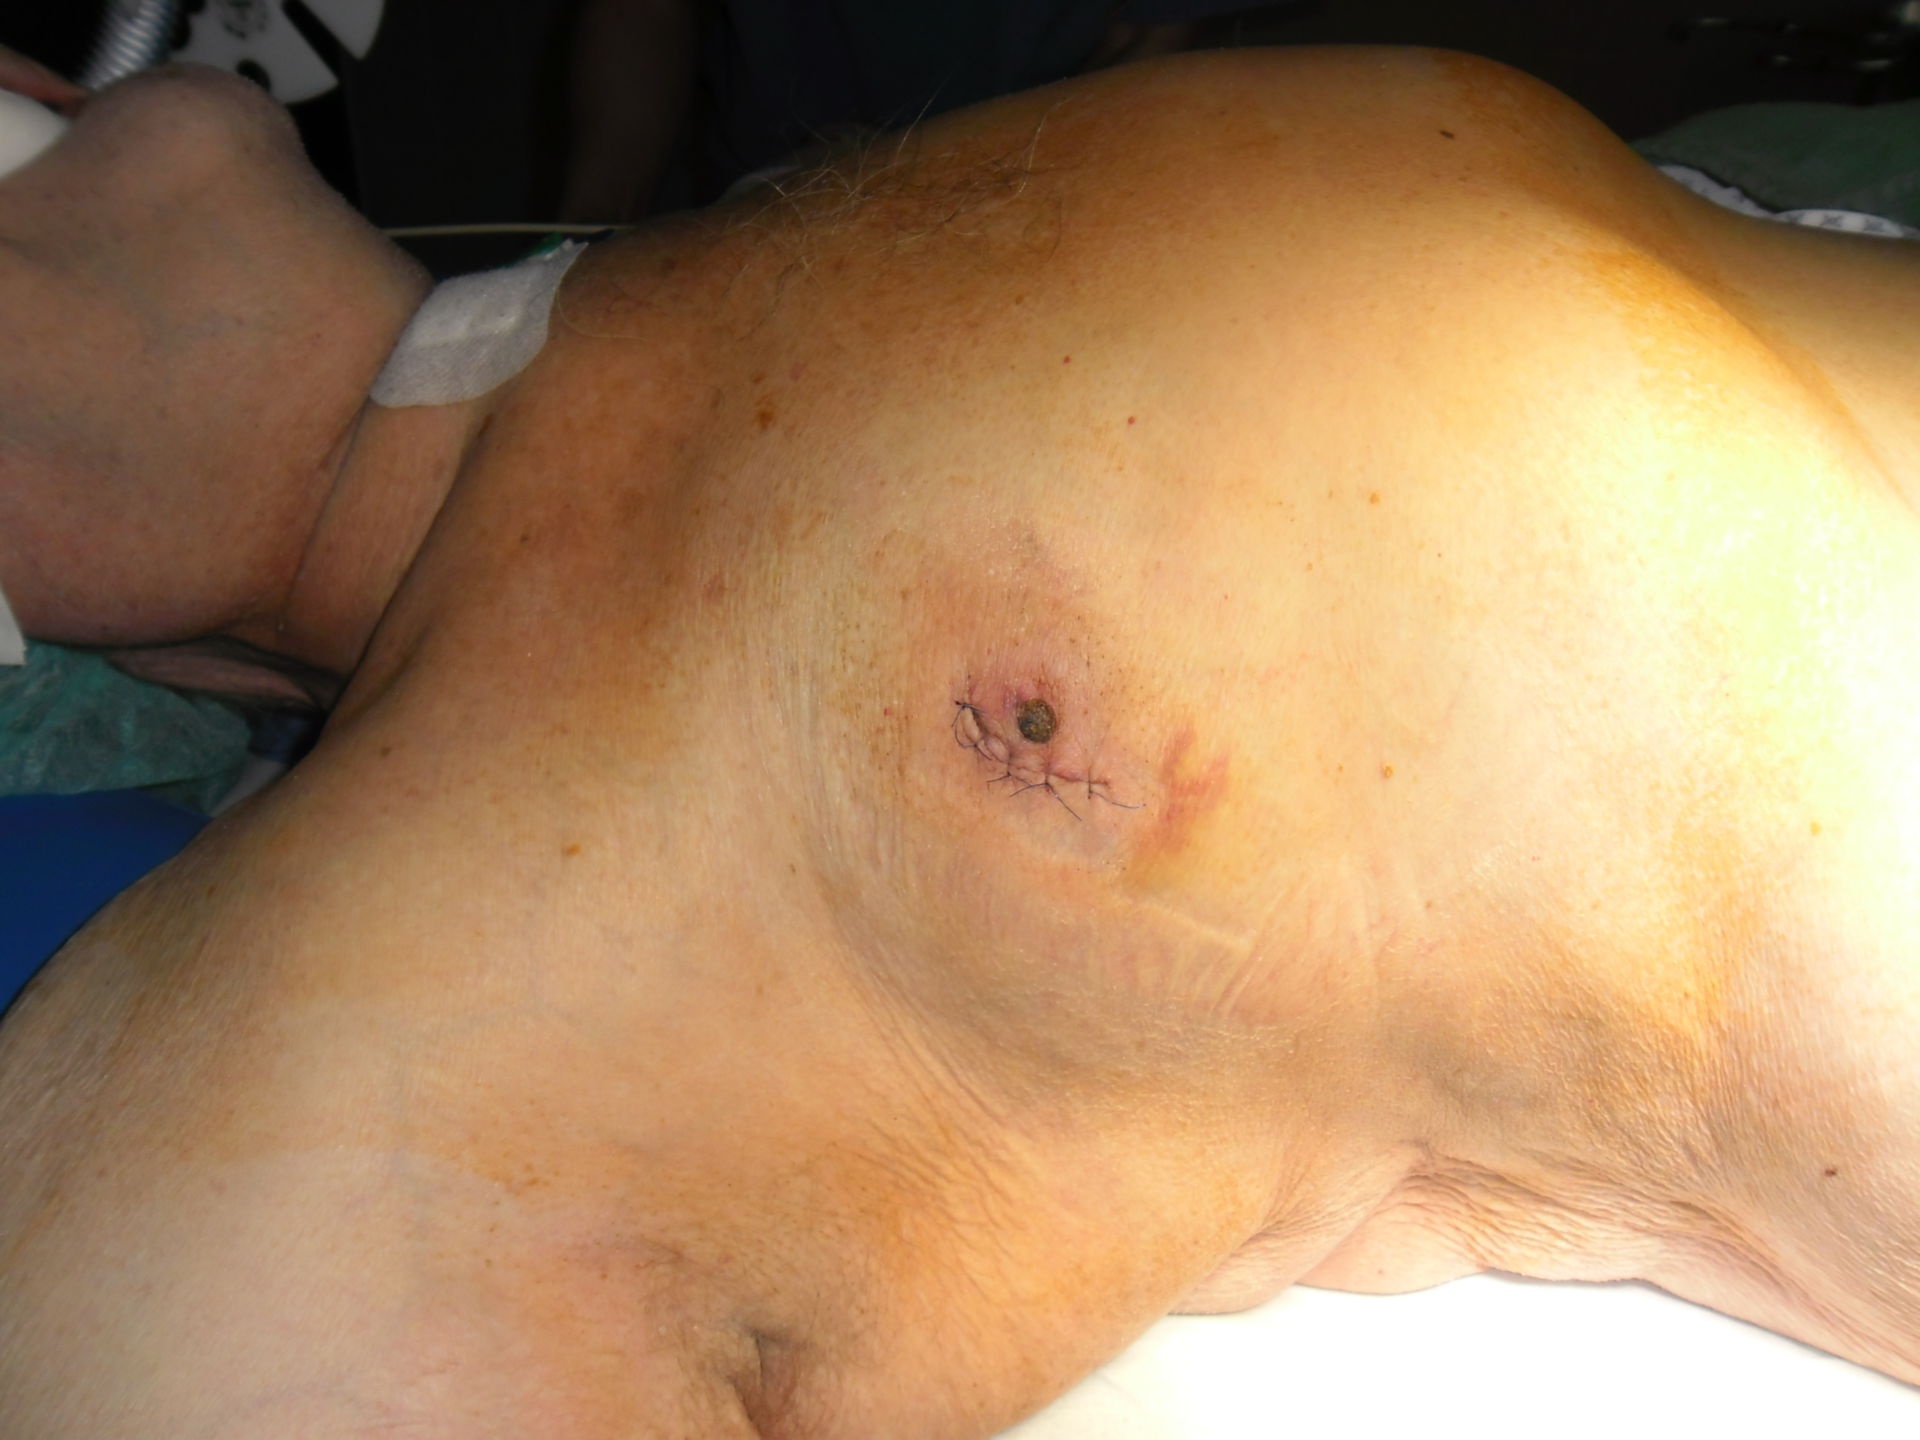 Male patient with breast cancer